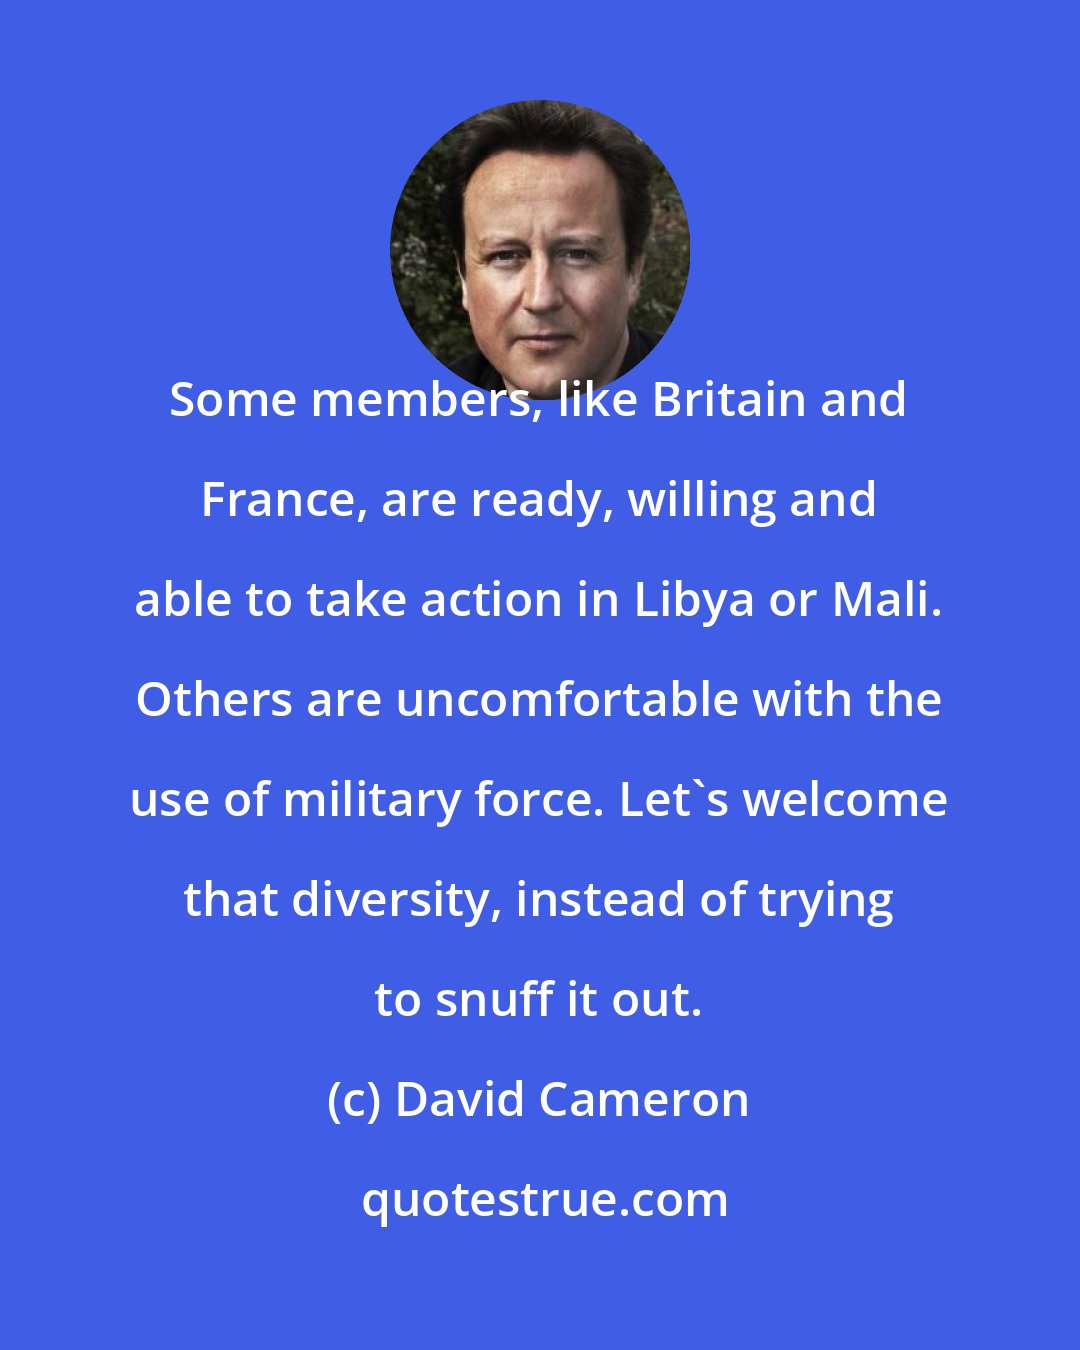 David Cameron: Some members, like Britain and France, are ready, willing and able to take action in Libya or Mali. Others are uncomfortable with the use of military force. Let's welcome that diversity, instead of trying to snuff it out.